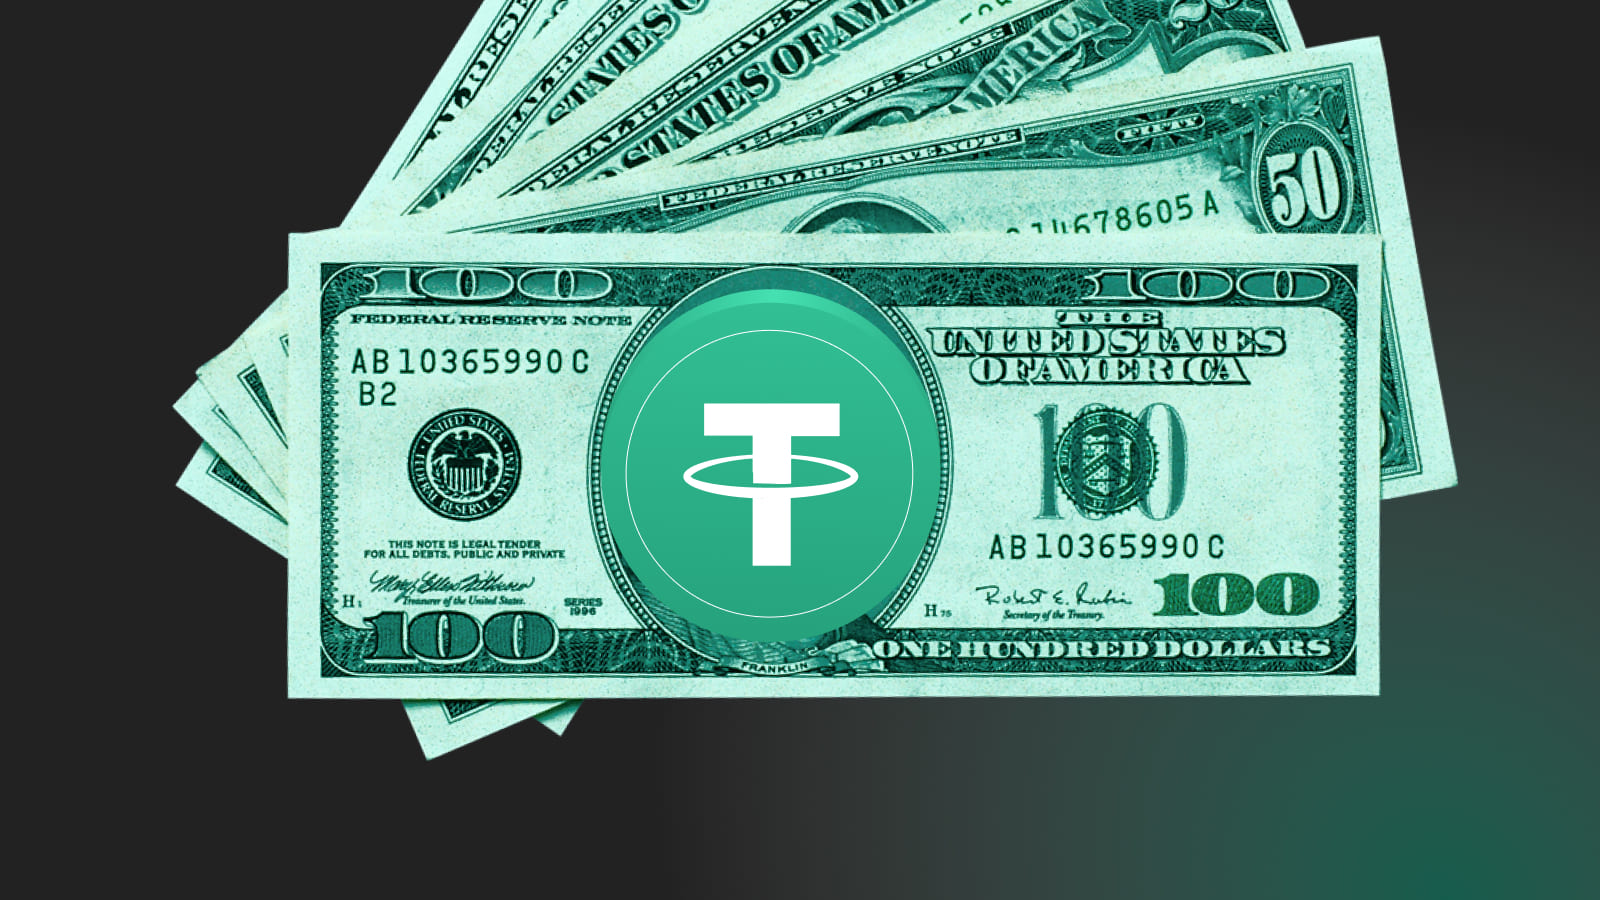 Tether is not as attractive of an investment as Bitcoin or Ethereum since it has a fixed value. Yet for the same reason, USDT is a popular instrument to use when you need to make cryptocurrency payments.  Tether (USDT): a Brief History Tether can trace its history back to a predecessor currency called Mastercoin. Two Tether founders, Brock Pierce and Craig Sellars, were involved in the Mastercoin fund. Later they teamed up with Reeve Collins to launch Tether's direct progenitor, known as Realcoin, in 2014.  Based in Santa Monica, California, the Realcoin project issued its first tokens on the Bitcoin blockchain using the Omni Layer protocol in October 2014 and changed its name to Tether shortly after that. Three versions of the stablecoin were released within this first phase: USTether, EuroTether, and YenTether, with USTether becoming the most popular.  Tether trade started on Bitfinex in 2015, and the currency has remained closely tied to that exchange ever since.  The overwhelming success of Tether as a Bitcoin trading pair (it reportedly accounted for up to 80% of Bitcoin trading in the summer of 2018) led to allegations that USDT was being used to manipulate cryptocurrency prices. Yet further studies have questioned these accusations.